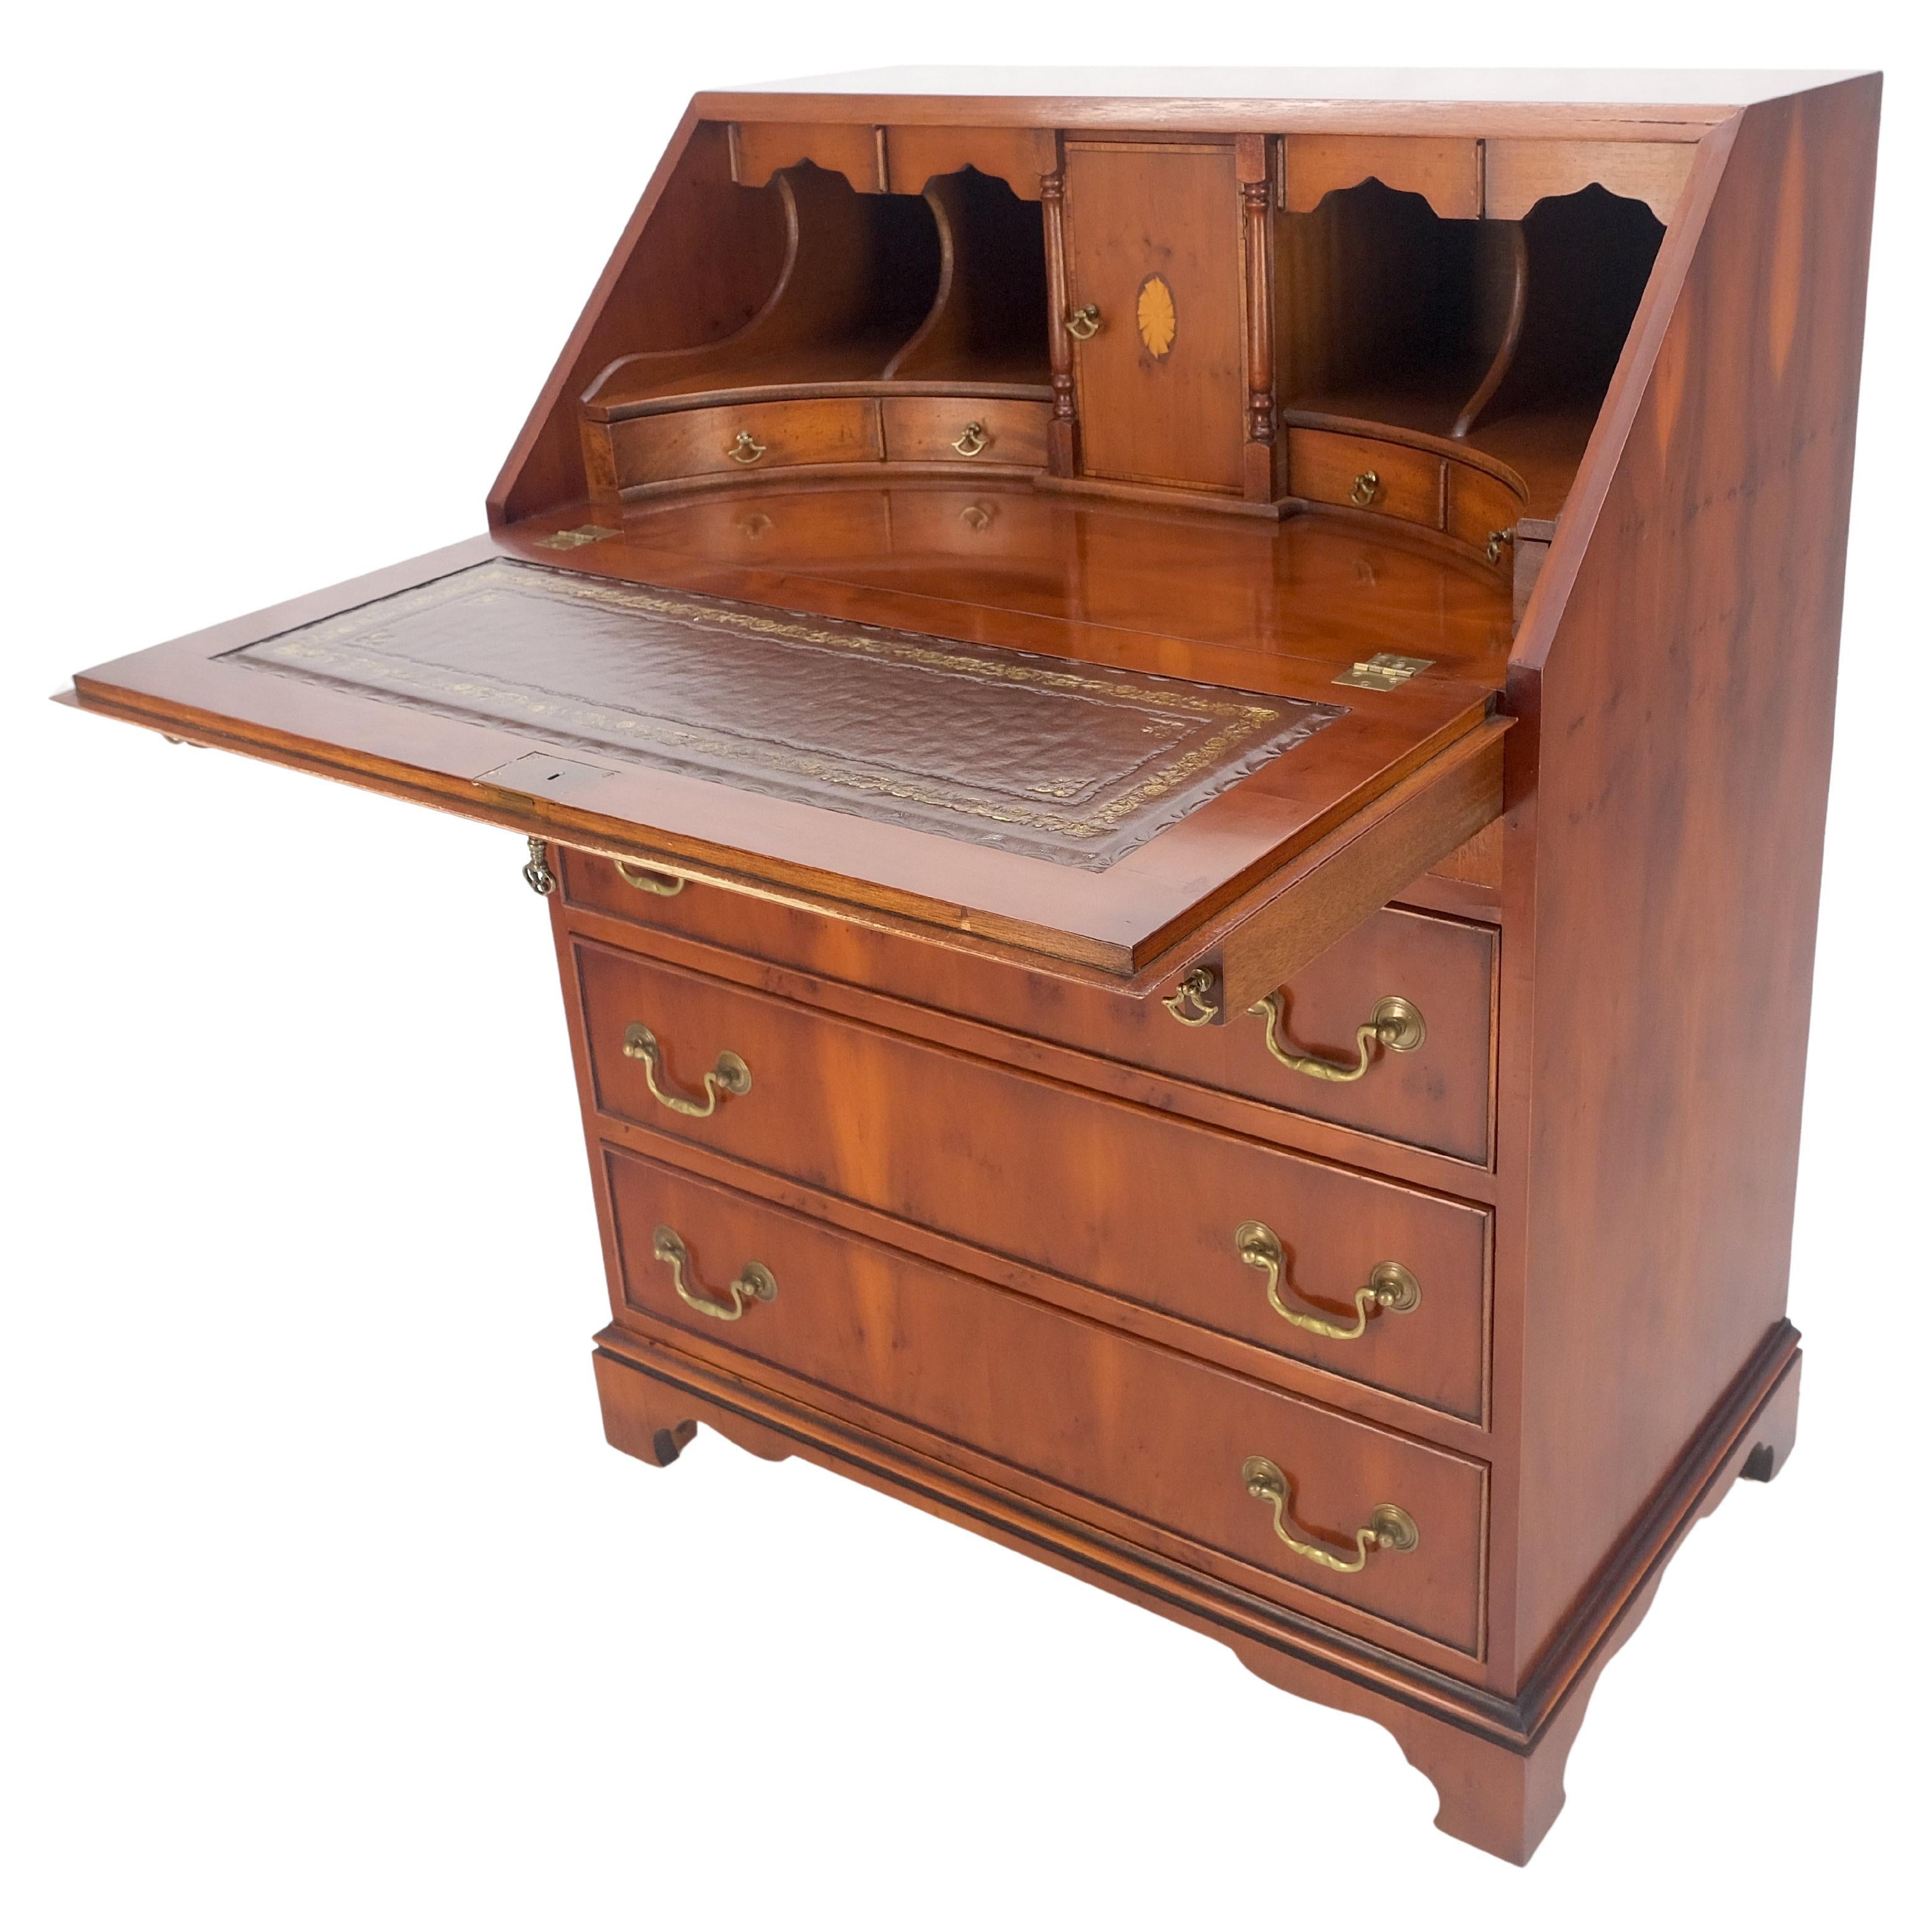 Yew Wood Leather Top Drop Front Secretary Desk 3 Drawers Brass Hardware MINT!